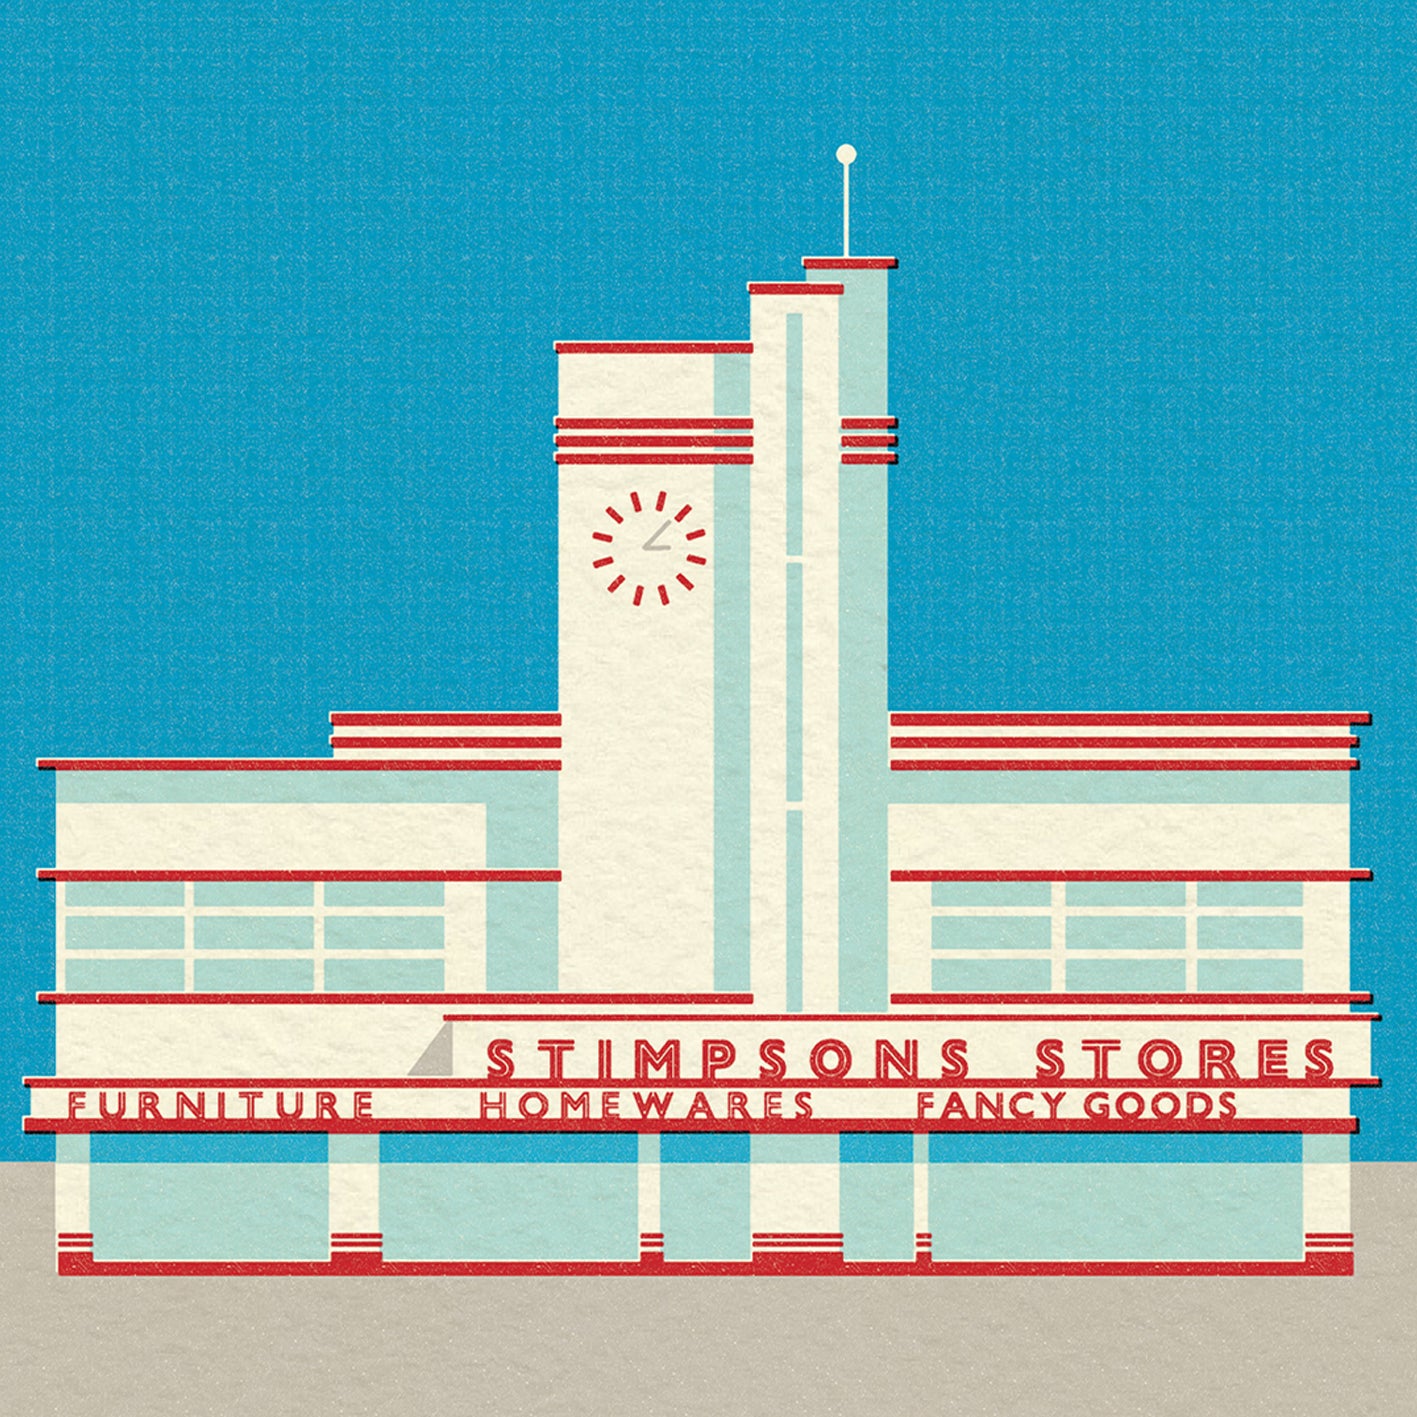 A  stylised illustration of an asymmetrical, streamlined building frontage in red and white against a cloudless blue sky. The words STIMPSONS STORES are written across the front, with department names underneath (furniture, homewares, fancy goods), and there is an art deco style clock on the central tower. 